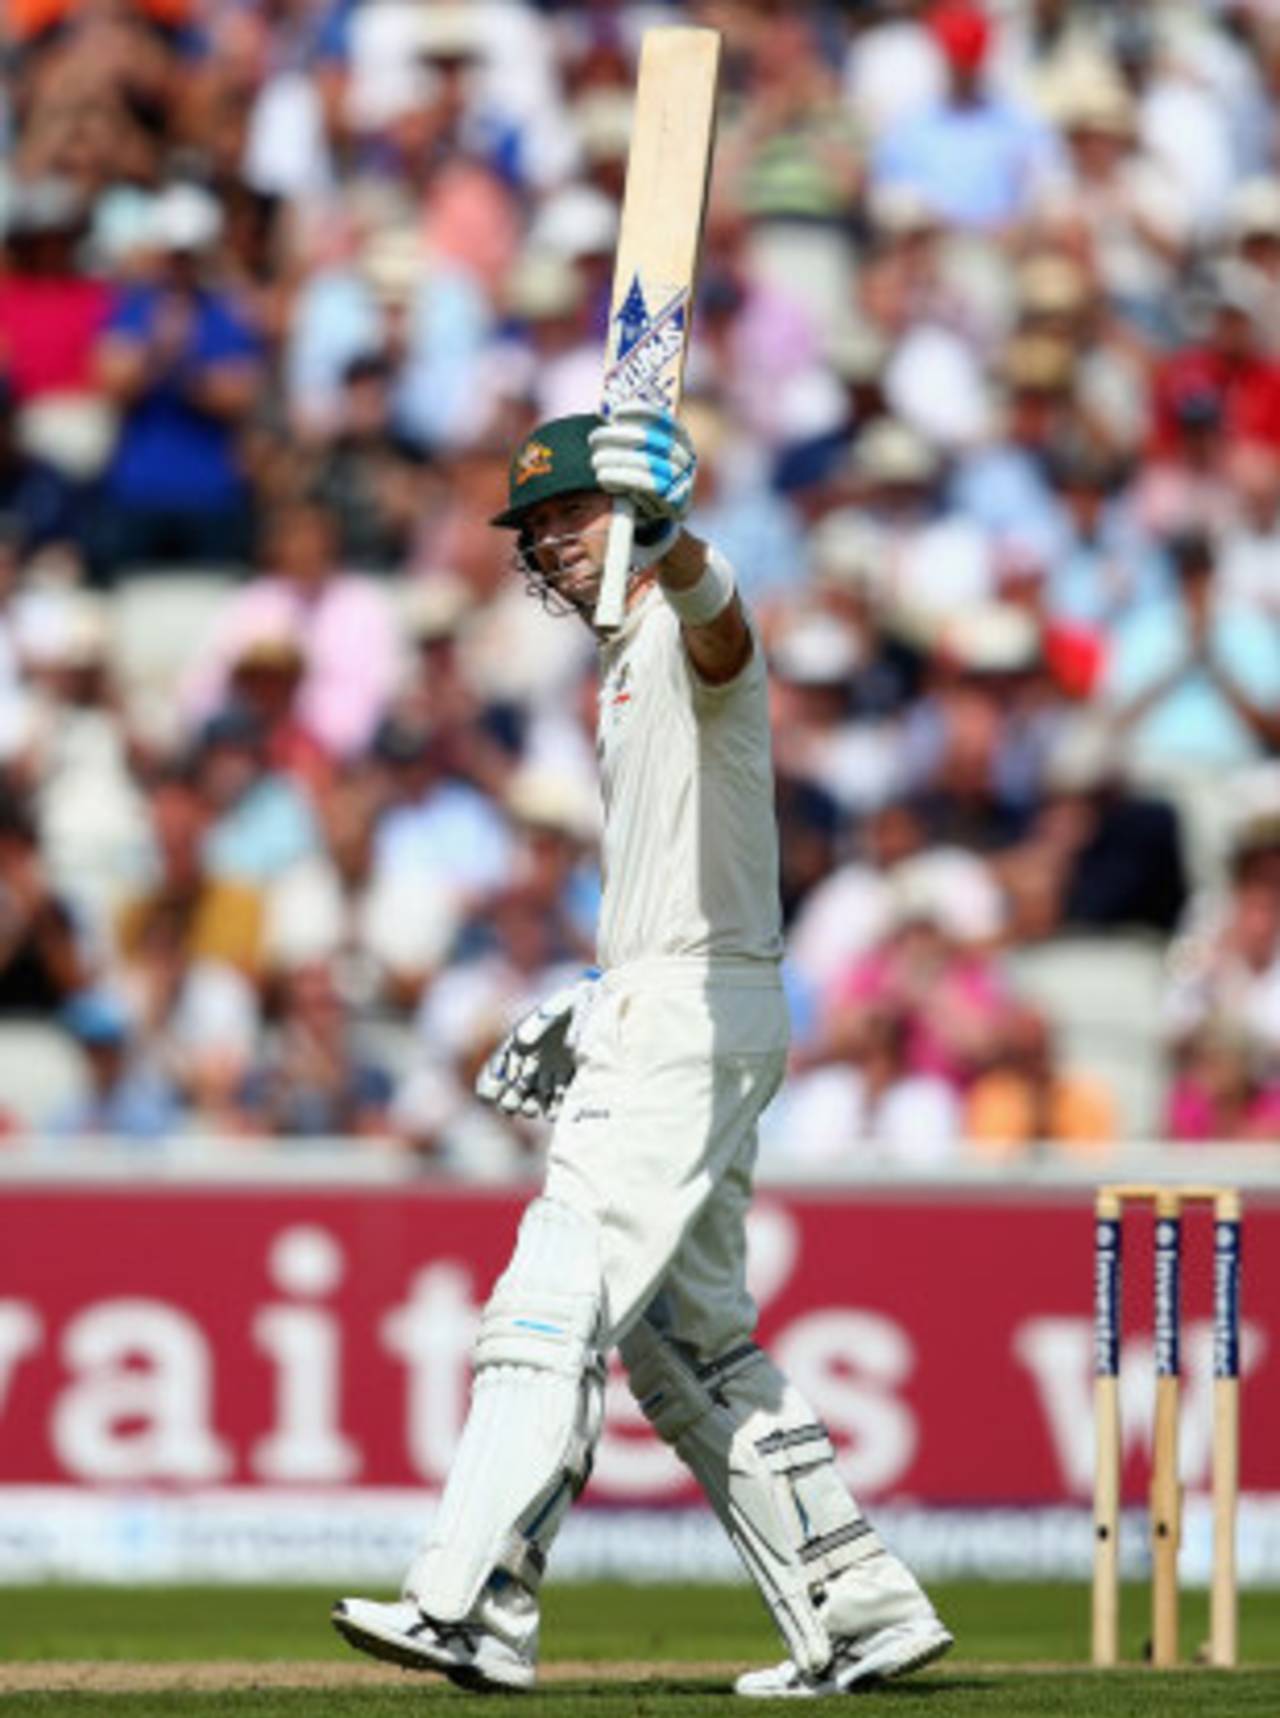 Michael Clarke extended his innings beyond 150, England v Australia, 3rd Investec Test, Old Trafford, 2nd day, August 2, 2013